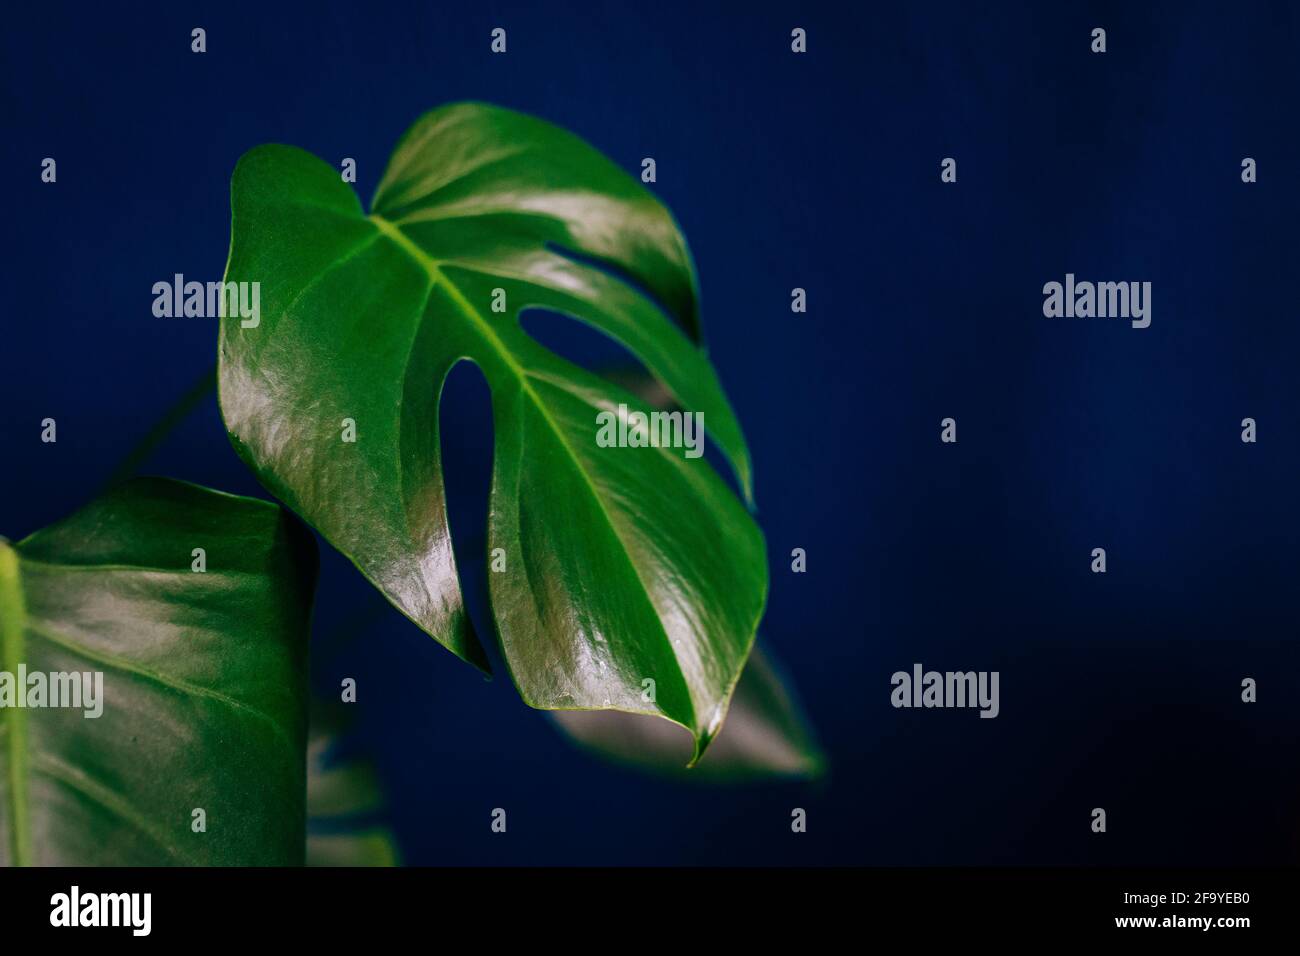 Close up of cheese plant monstera delisiosa leaves against a dark blue wall Stock Photo